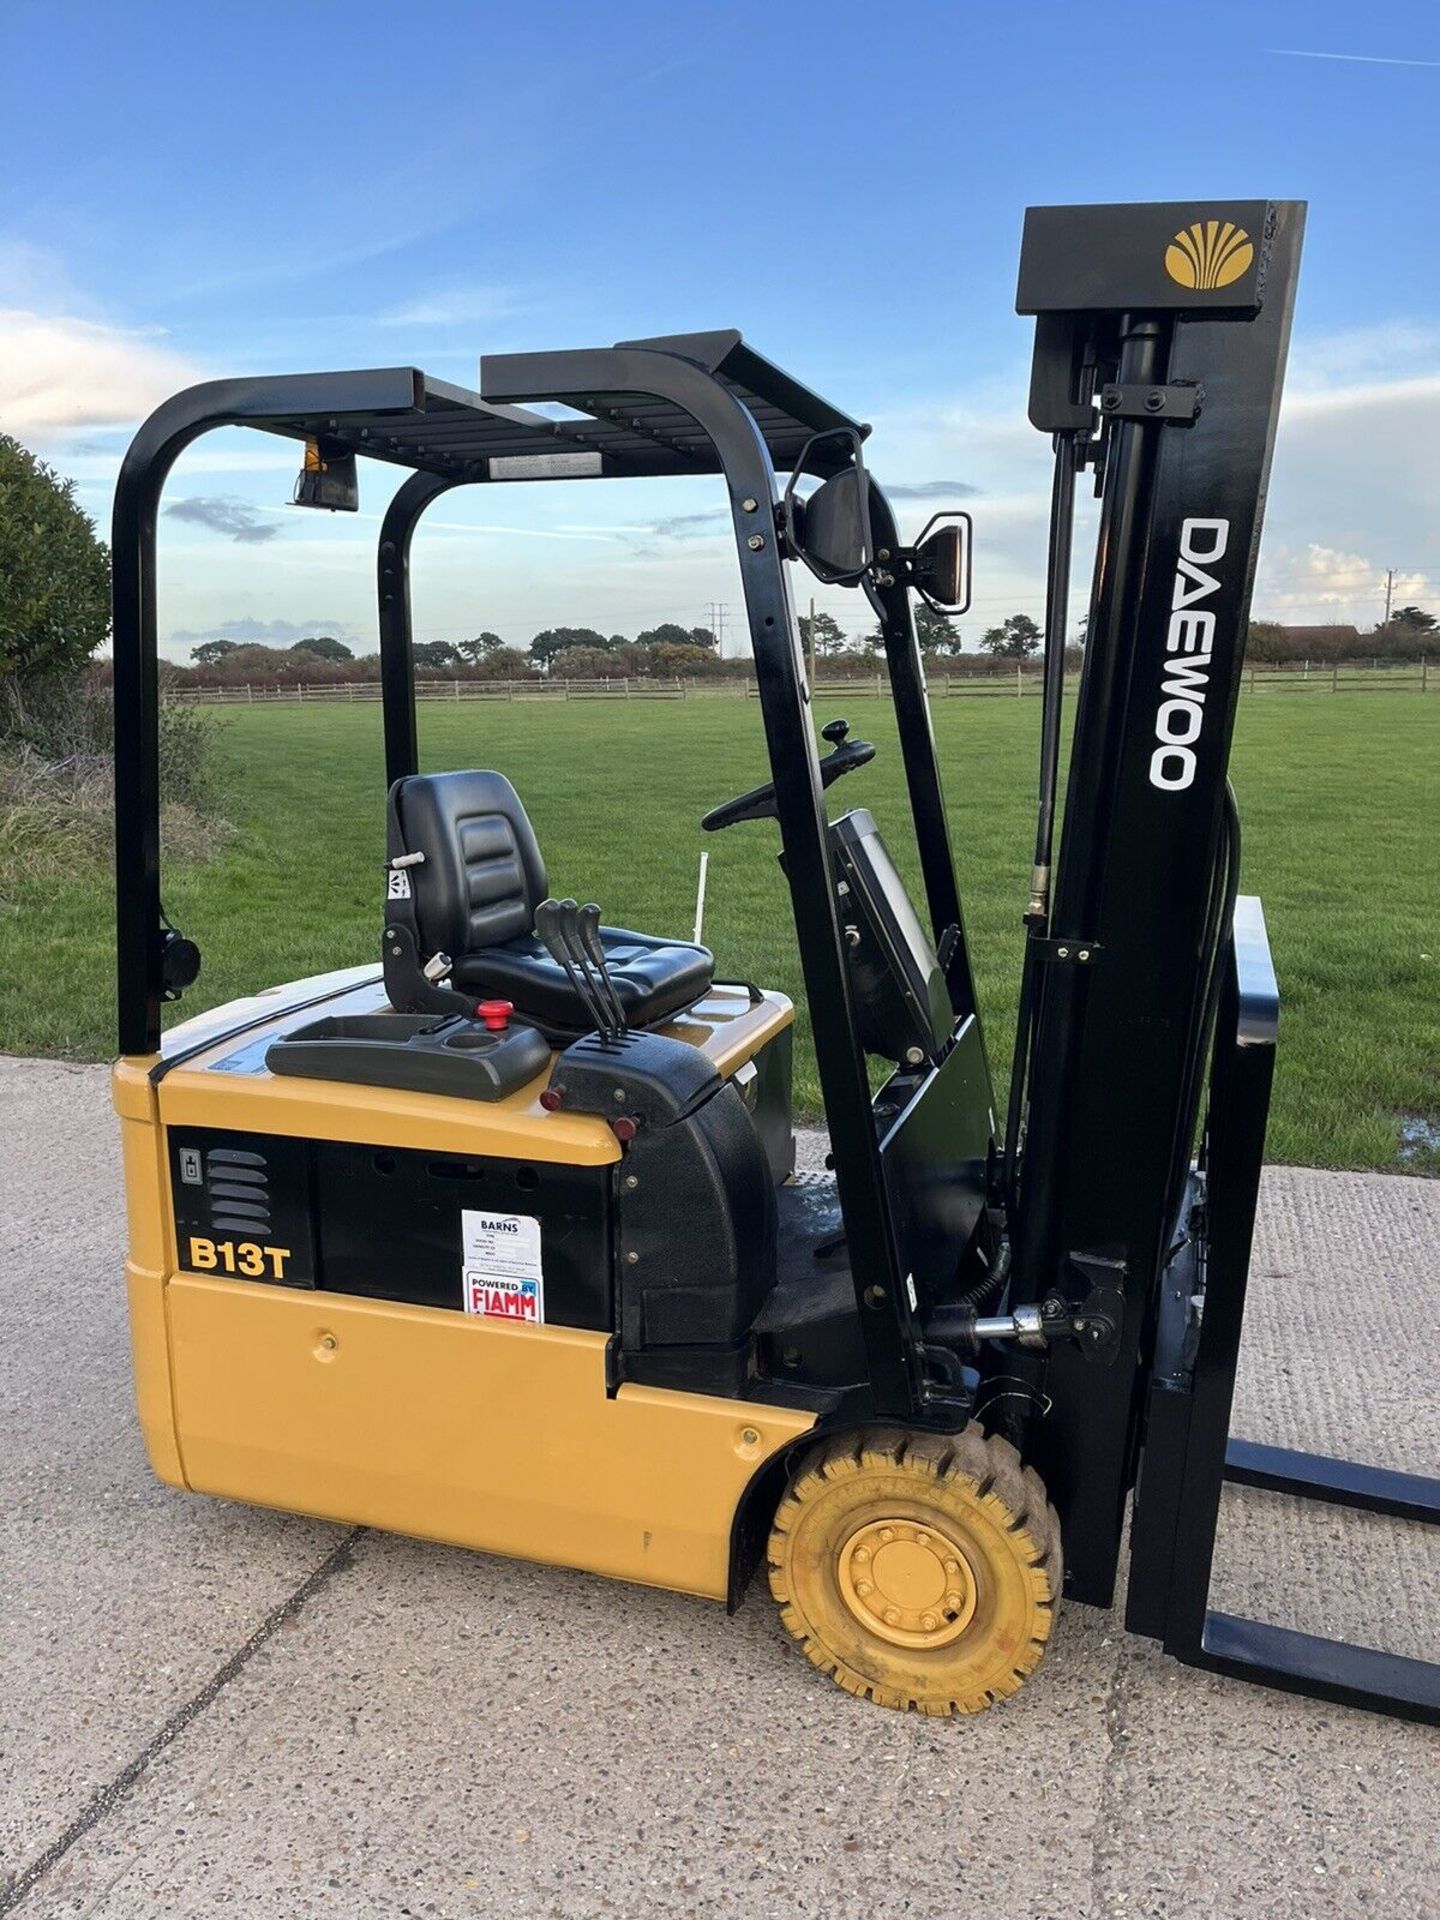 DEAWOO, 1.3 Electric Forklift Truck (Container Spec)